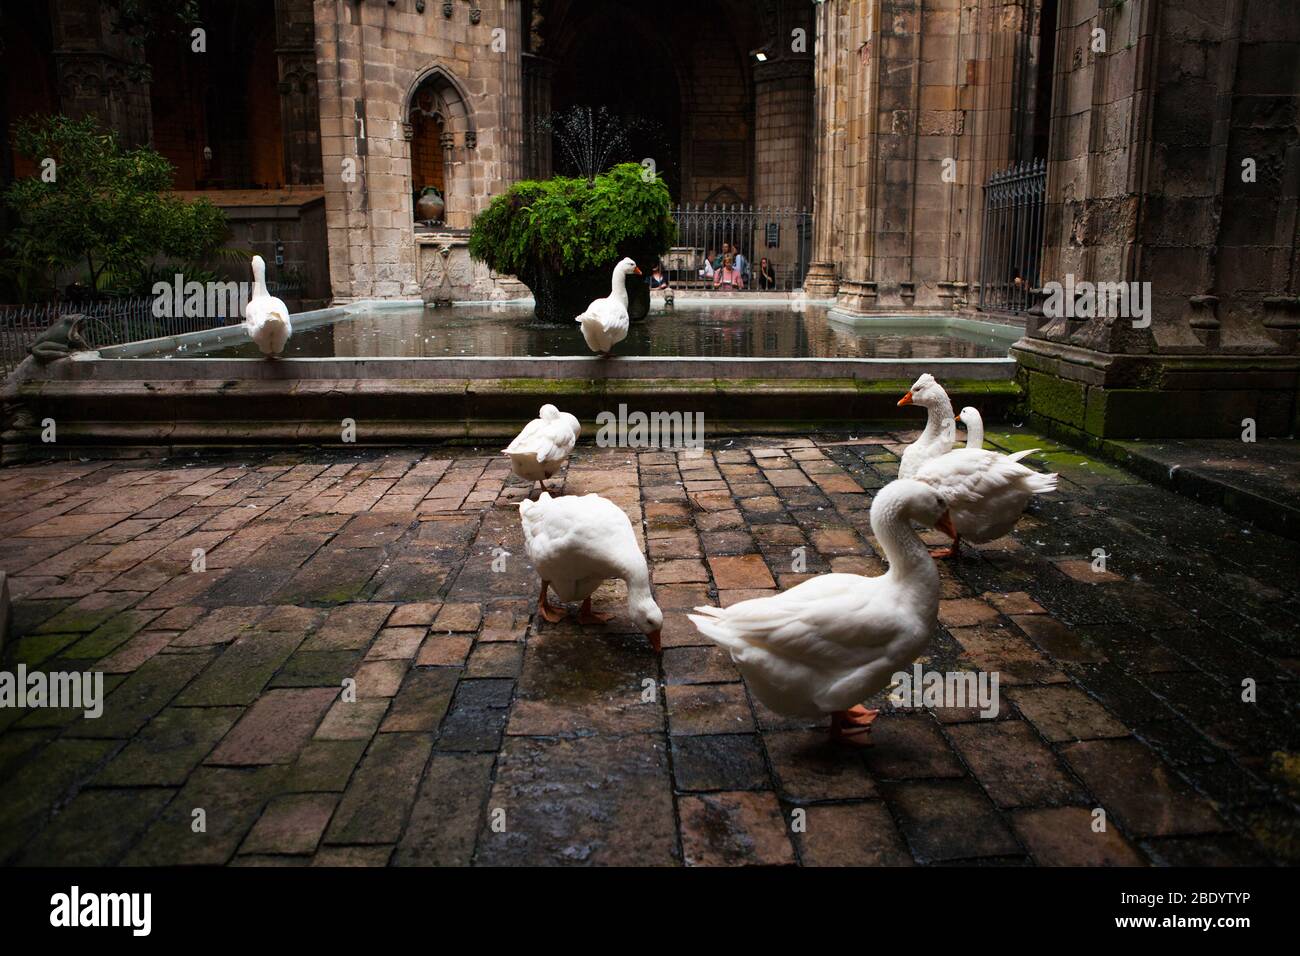 Barcelona, Spain -October 17, 2016: In the cloister of the cathedral, 13 geese are guarding the tomb of Saint Eulalia, martyred by the Romans. Stock Photo